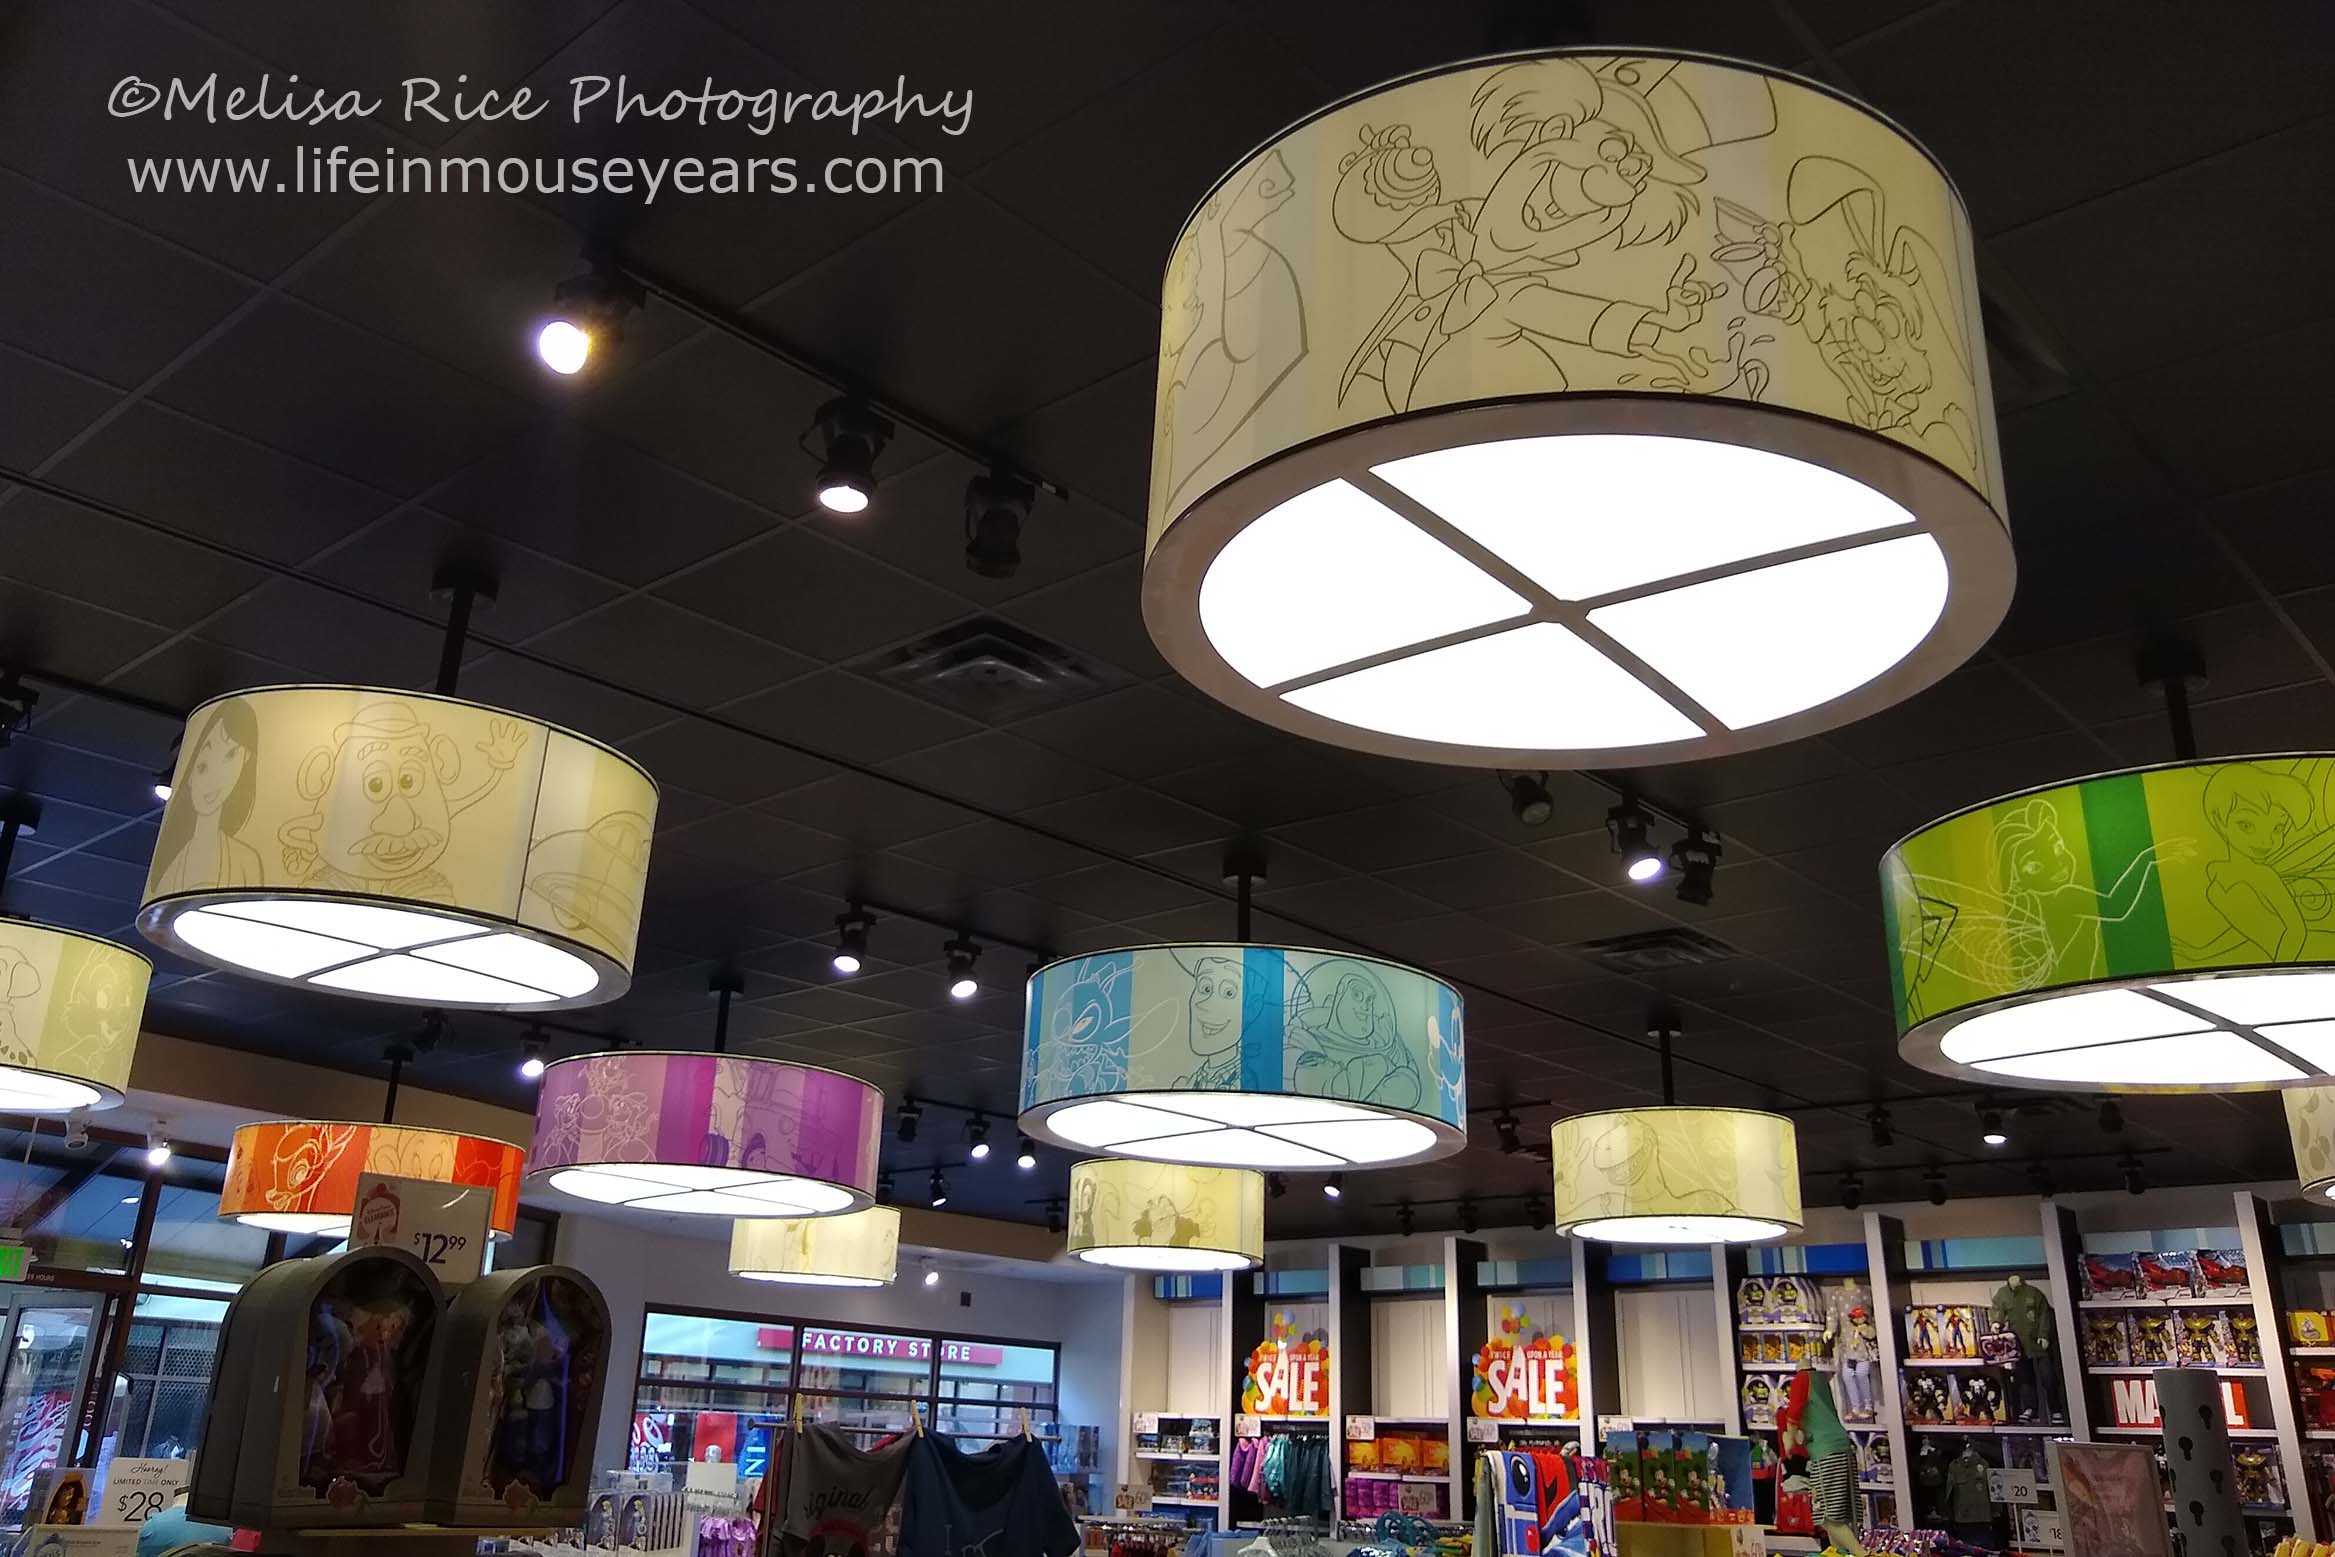 Disney Outlet at Woodburn Premium Outlets | Life in Mouse Years